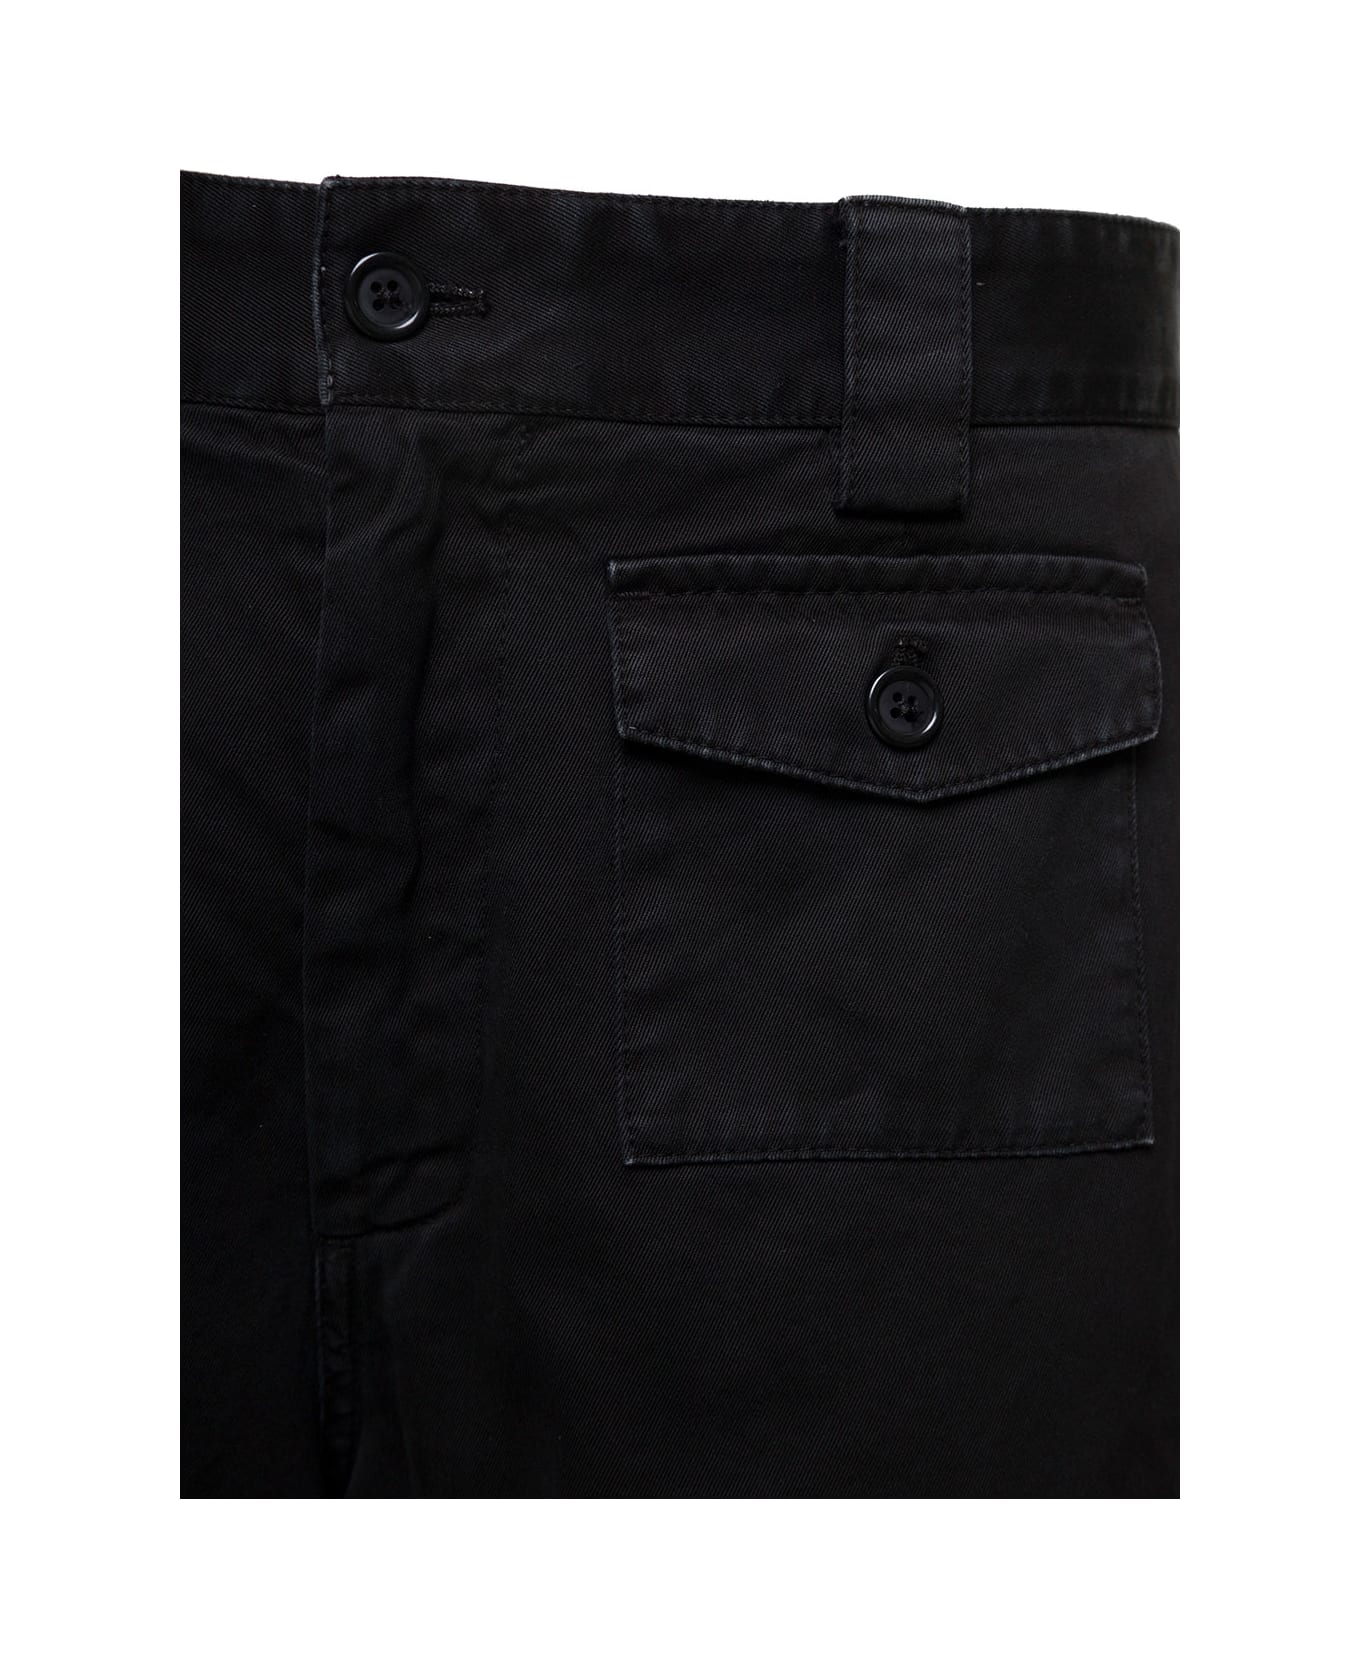 Dolce & Gabbana Black Cargo Pants With Multi-pockets In Cotton Man - Black ボトムス